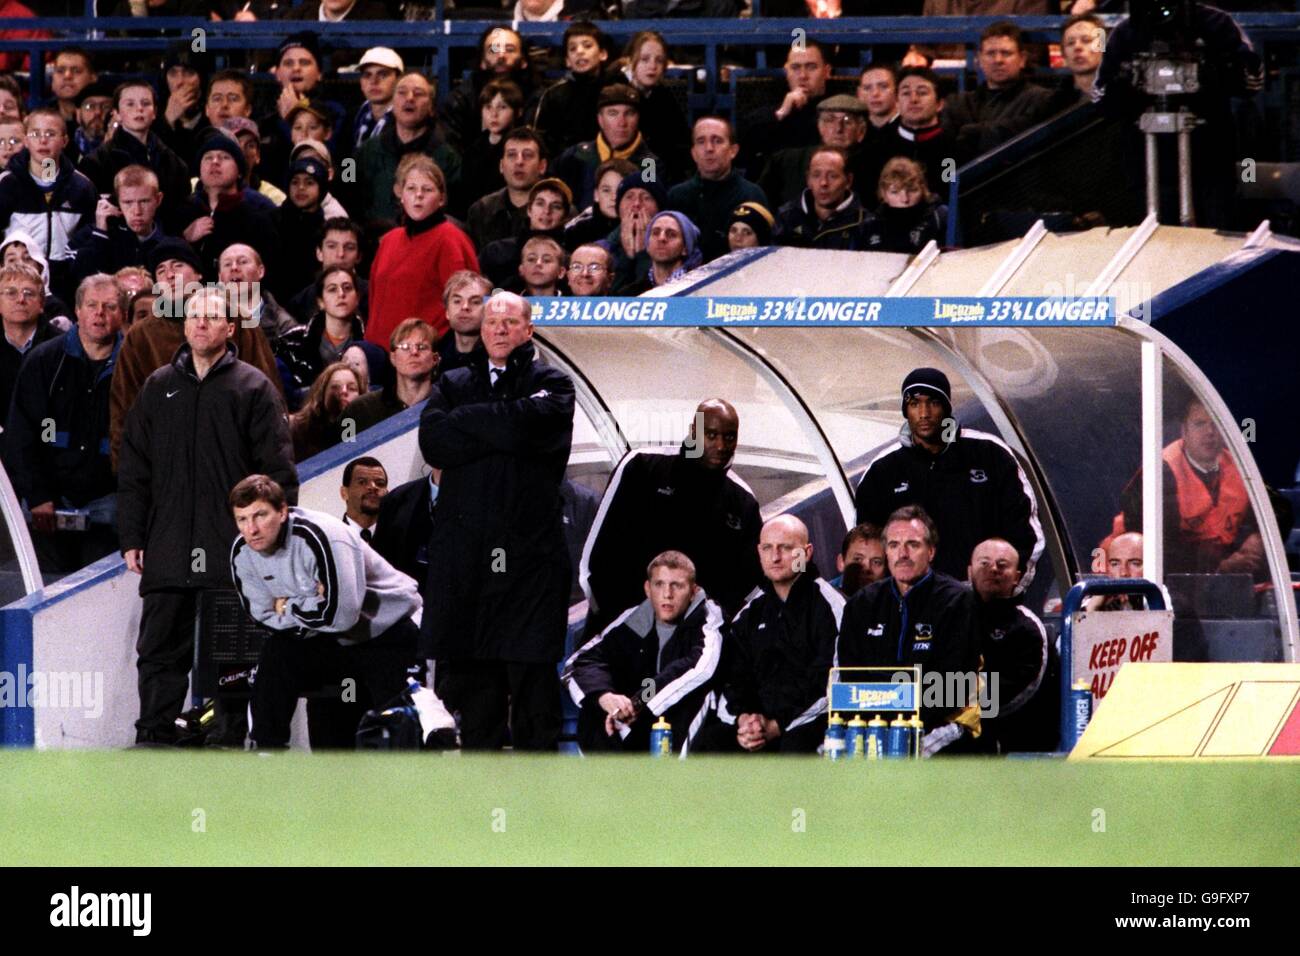 Soccer - FA Carling Premiership - Chelsea v Derby County. Derby County Assistant Manager Colin Todd (second l) and manager Jim Smith (c) watch in despair as they suffer defeat Stock Photo